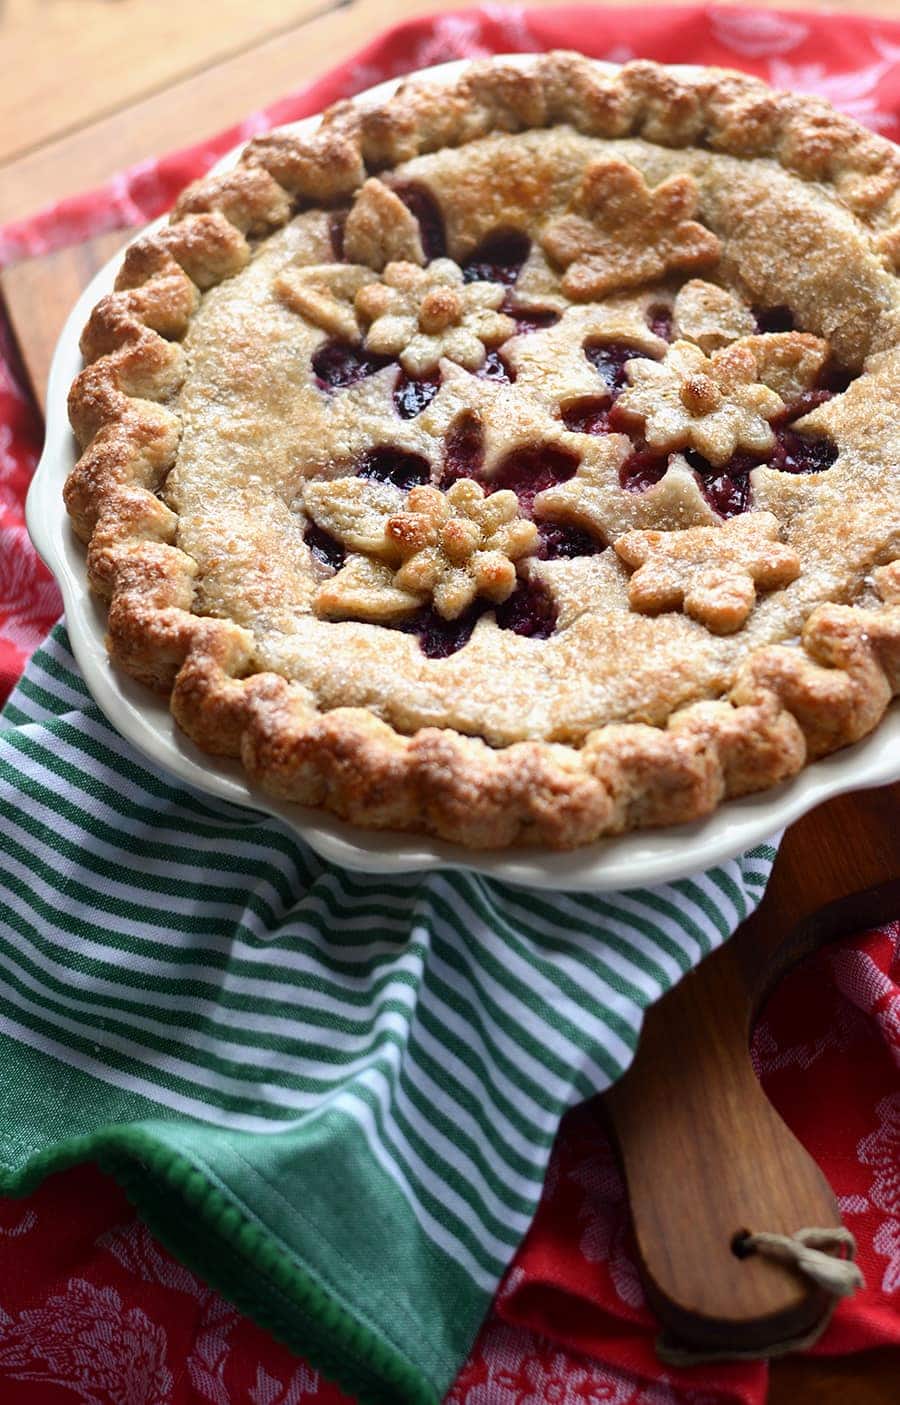 Pie at an angle Web - Magnificent Mixed Berry Pie with Butter Almond Crust